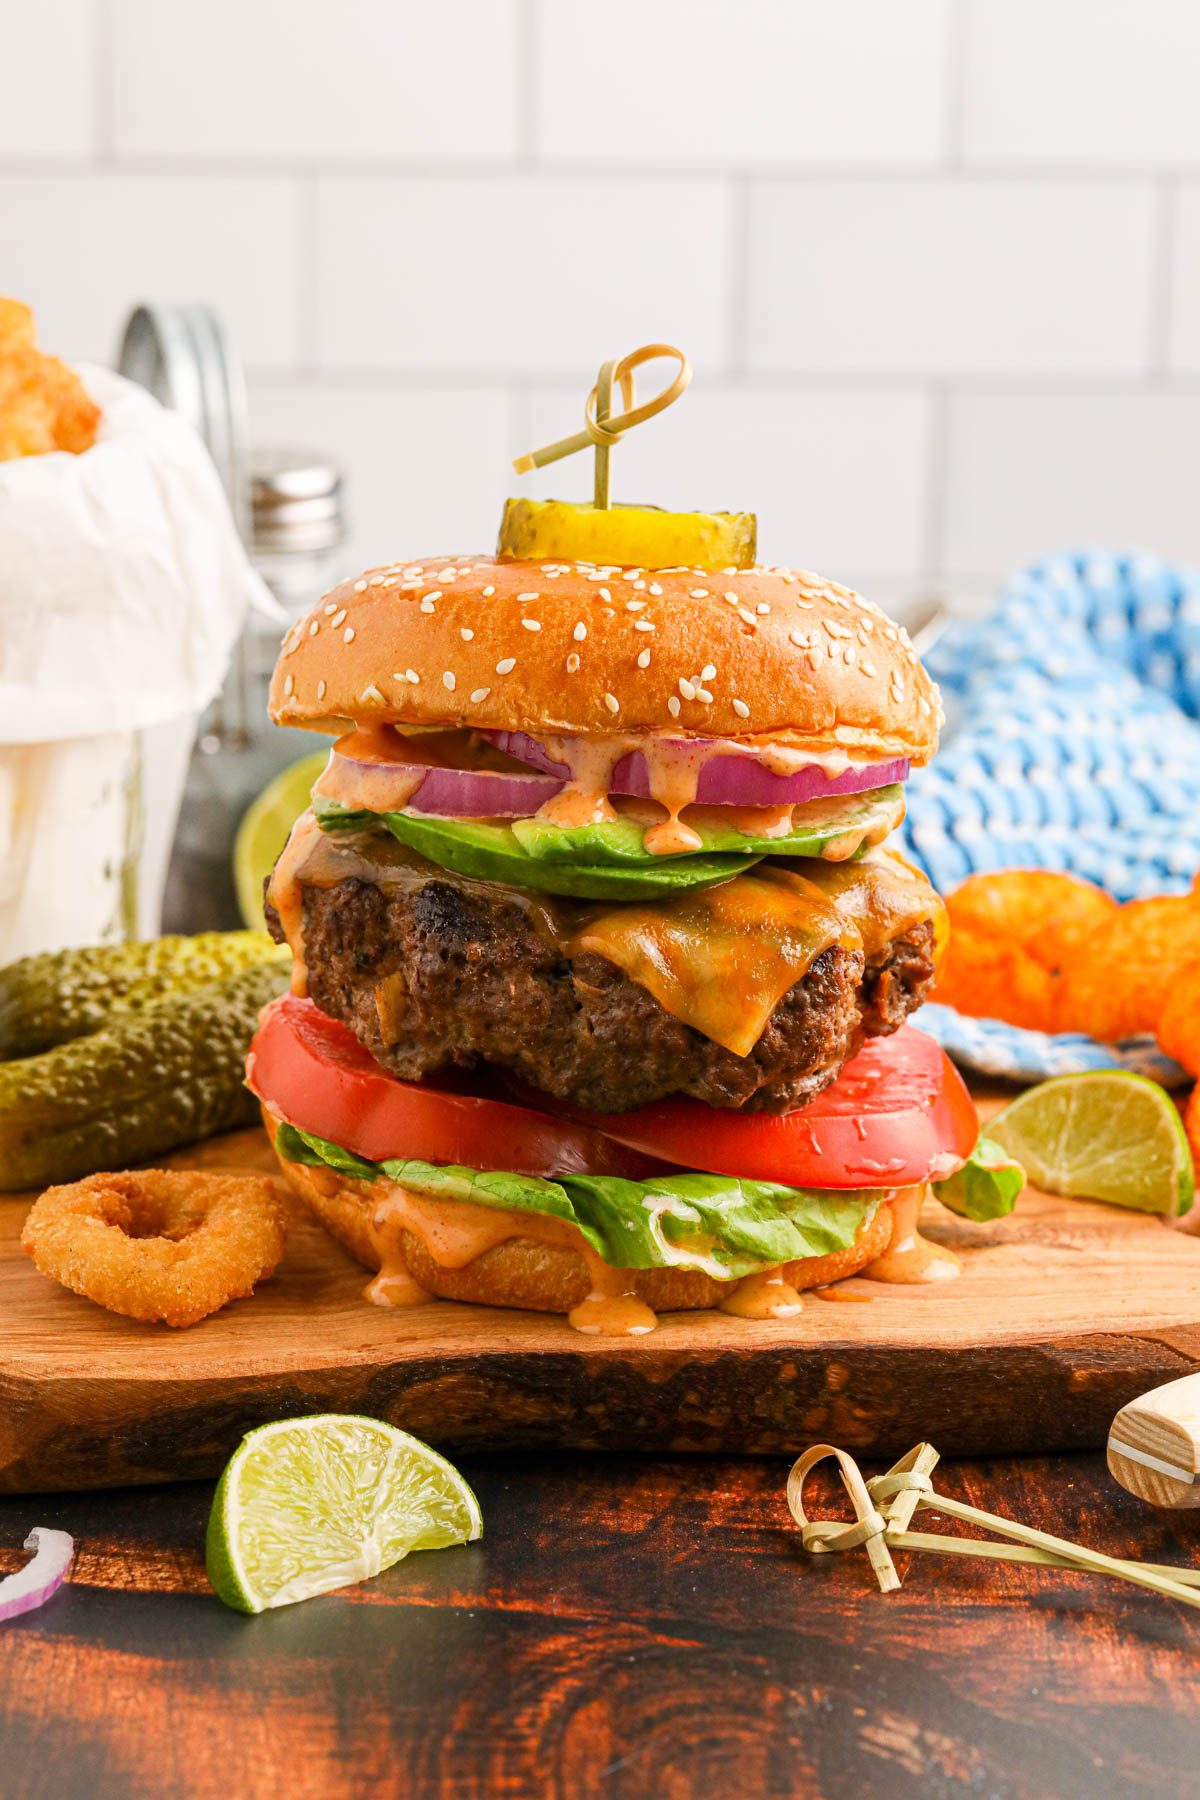 Chipotle burger on a wooden cutting board, with condiments visible around the burger in the foreground and background. 